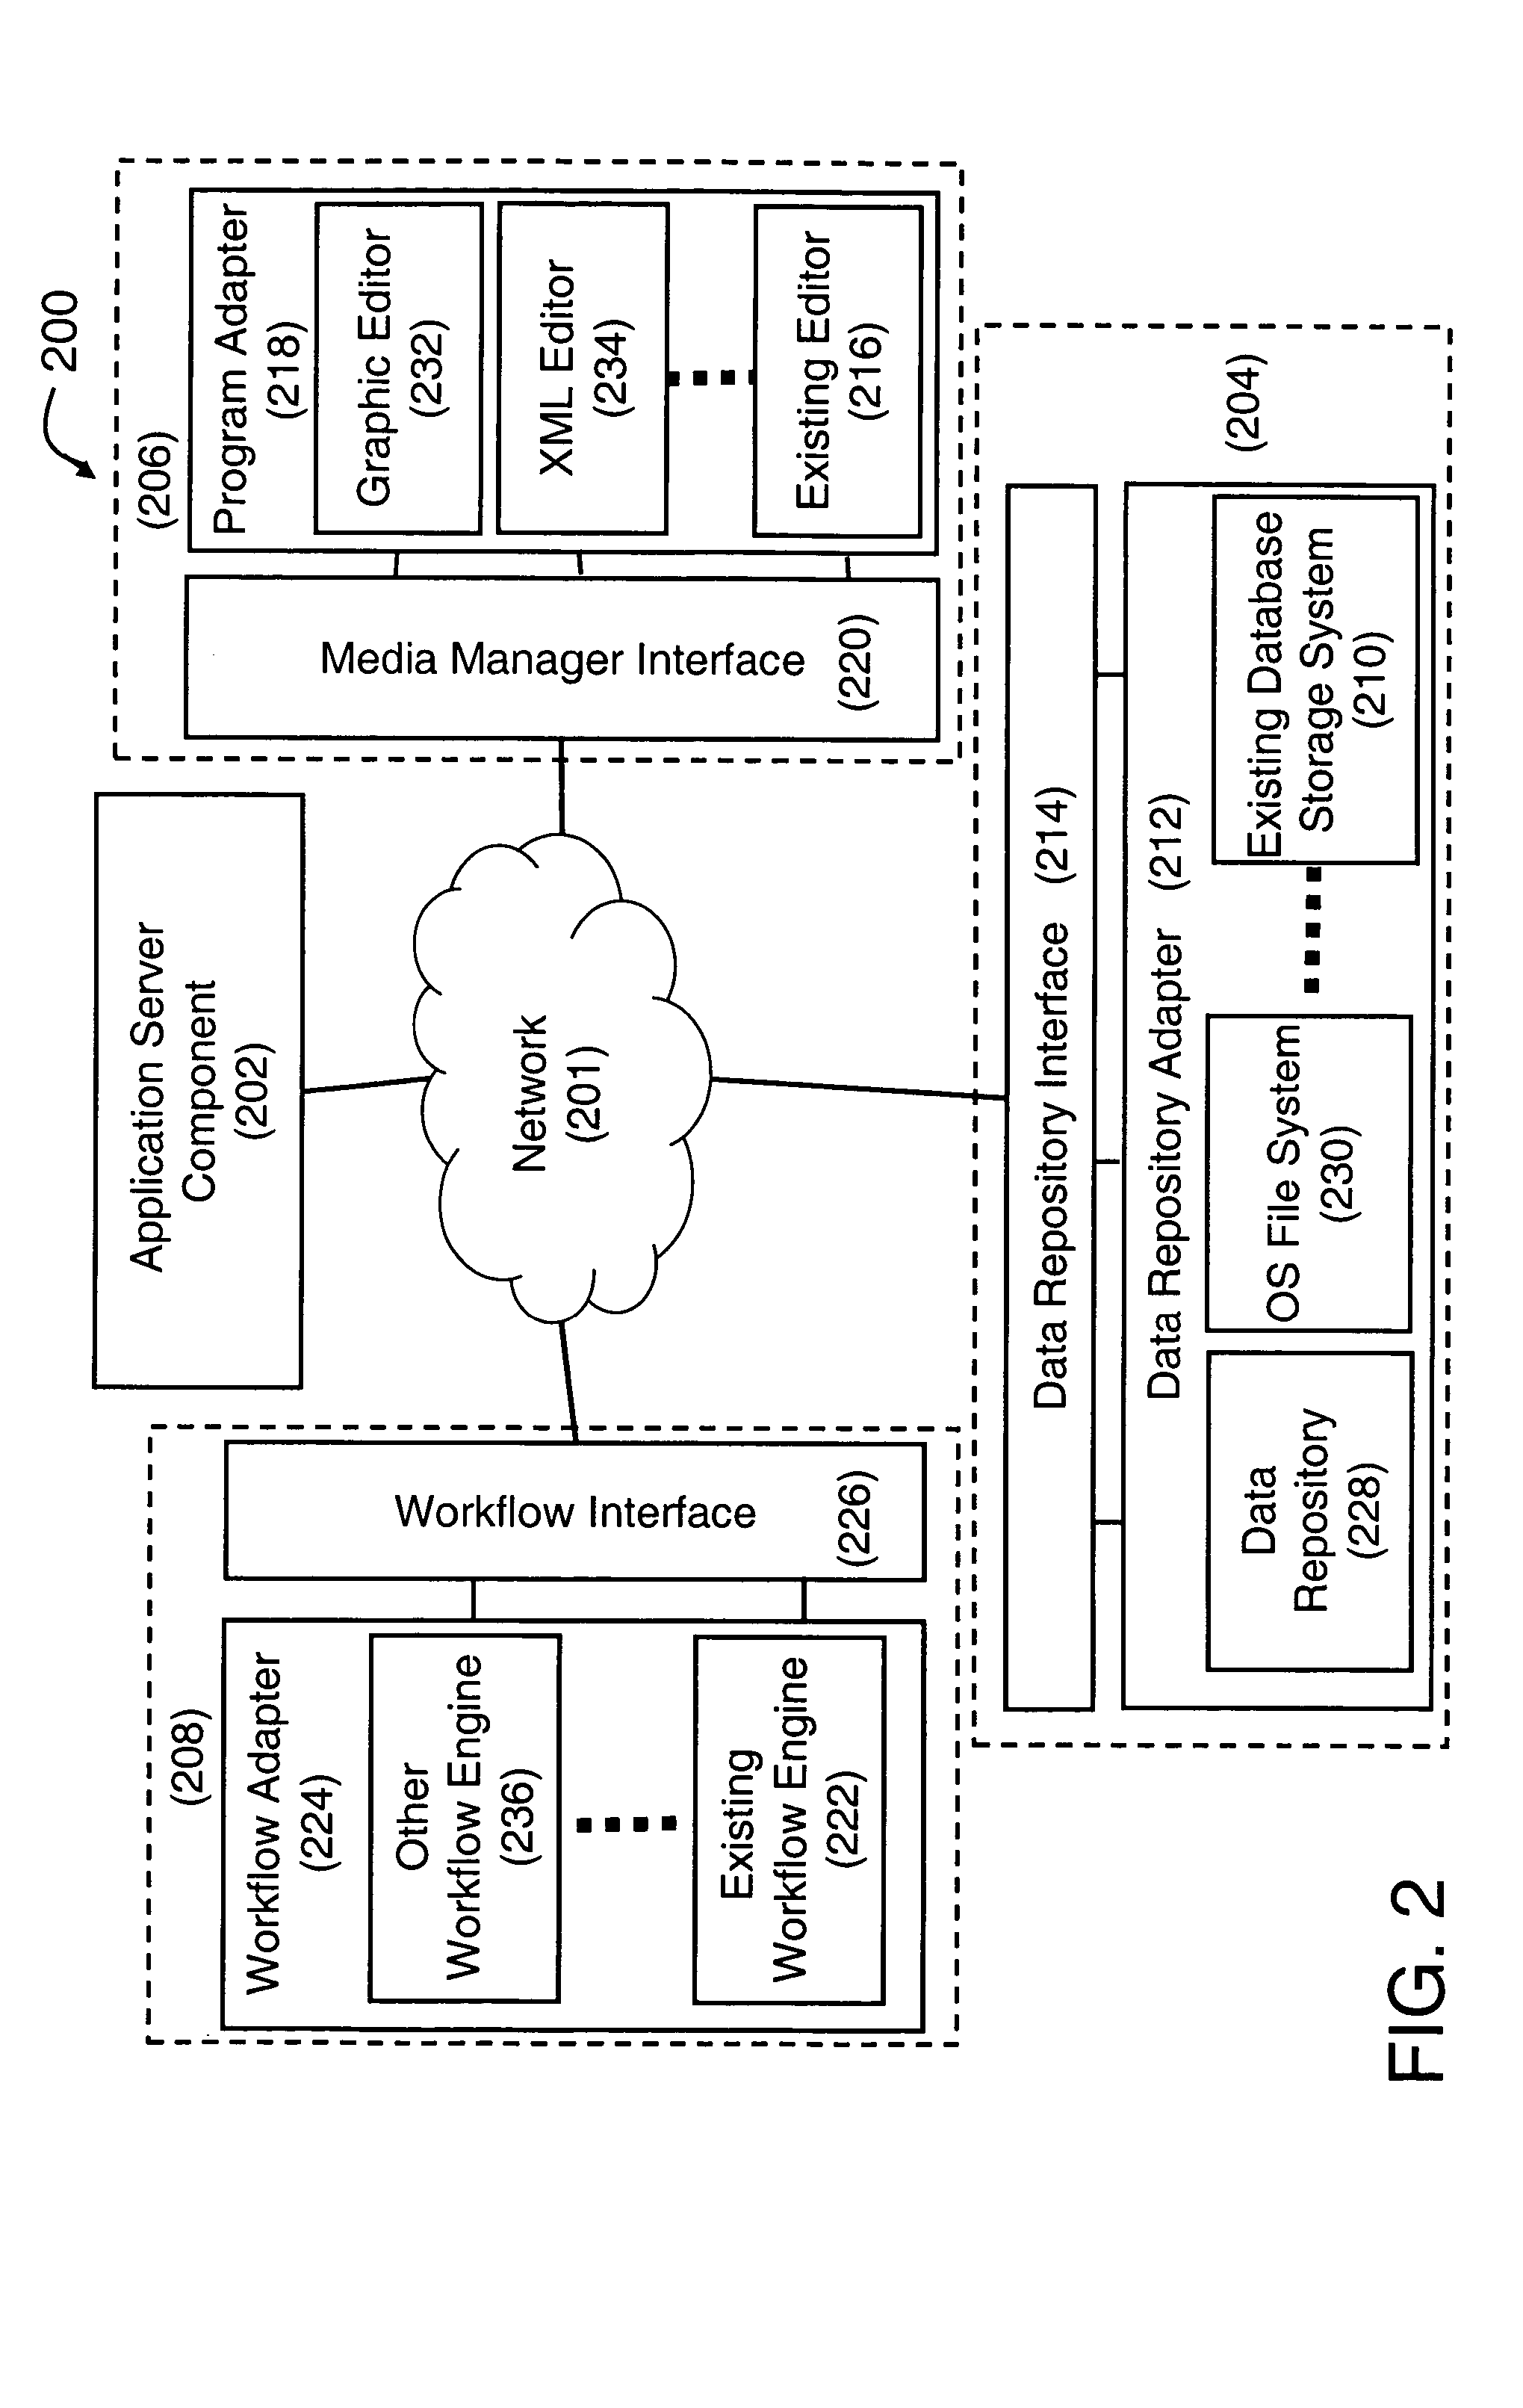 System and method for information creation, management and publication of documentation from a single source